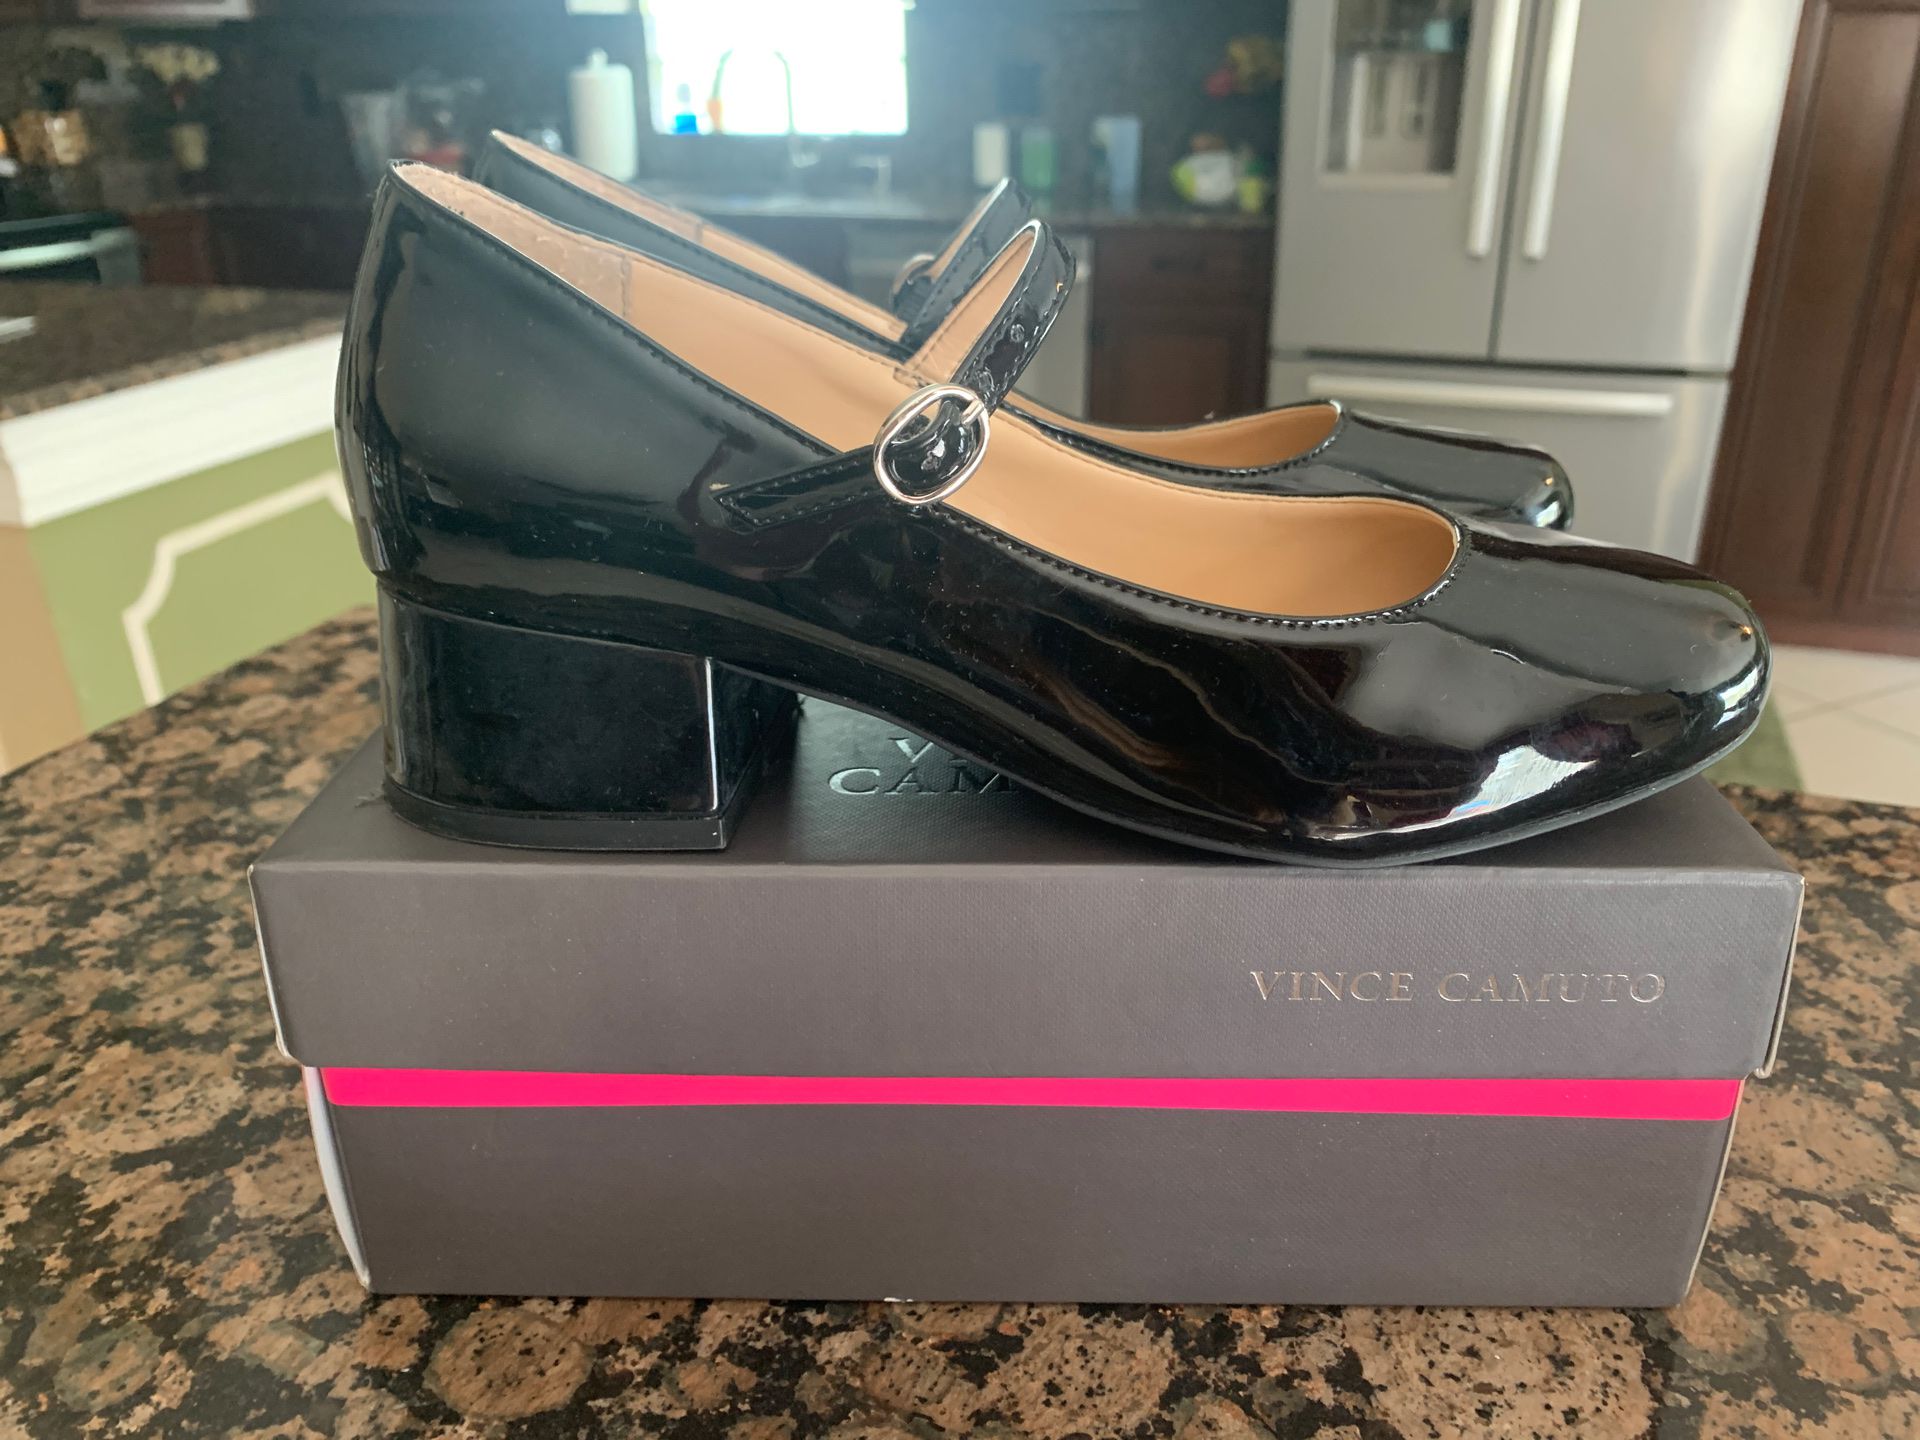 Child’s size 5 Vince Camuto Show